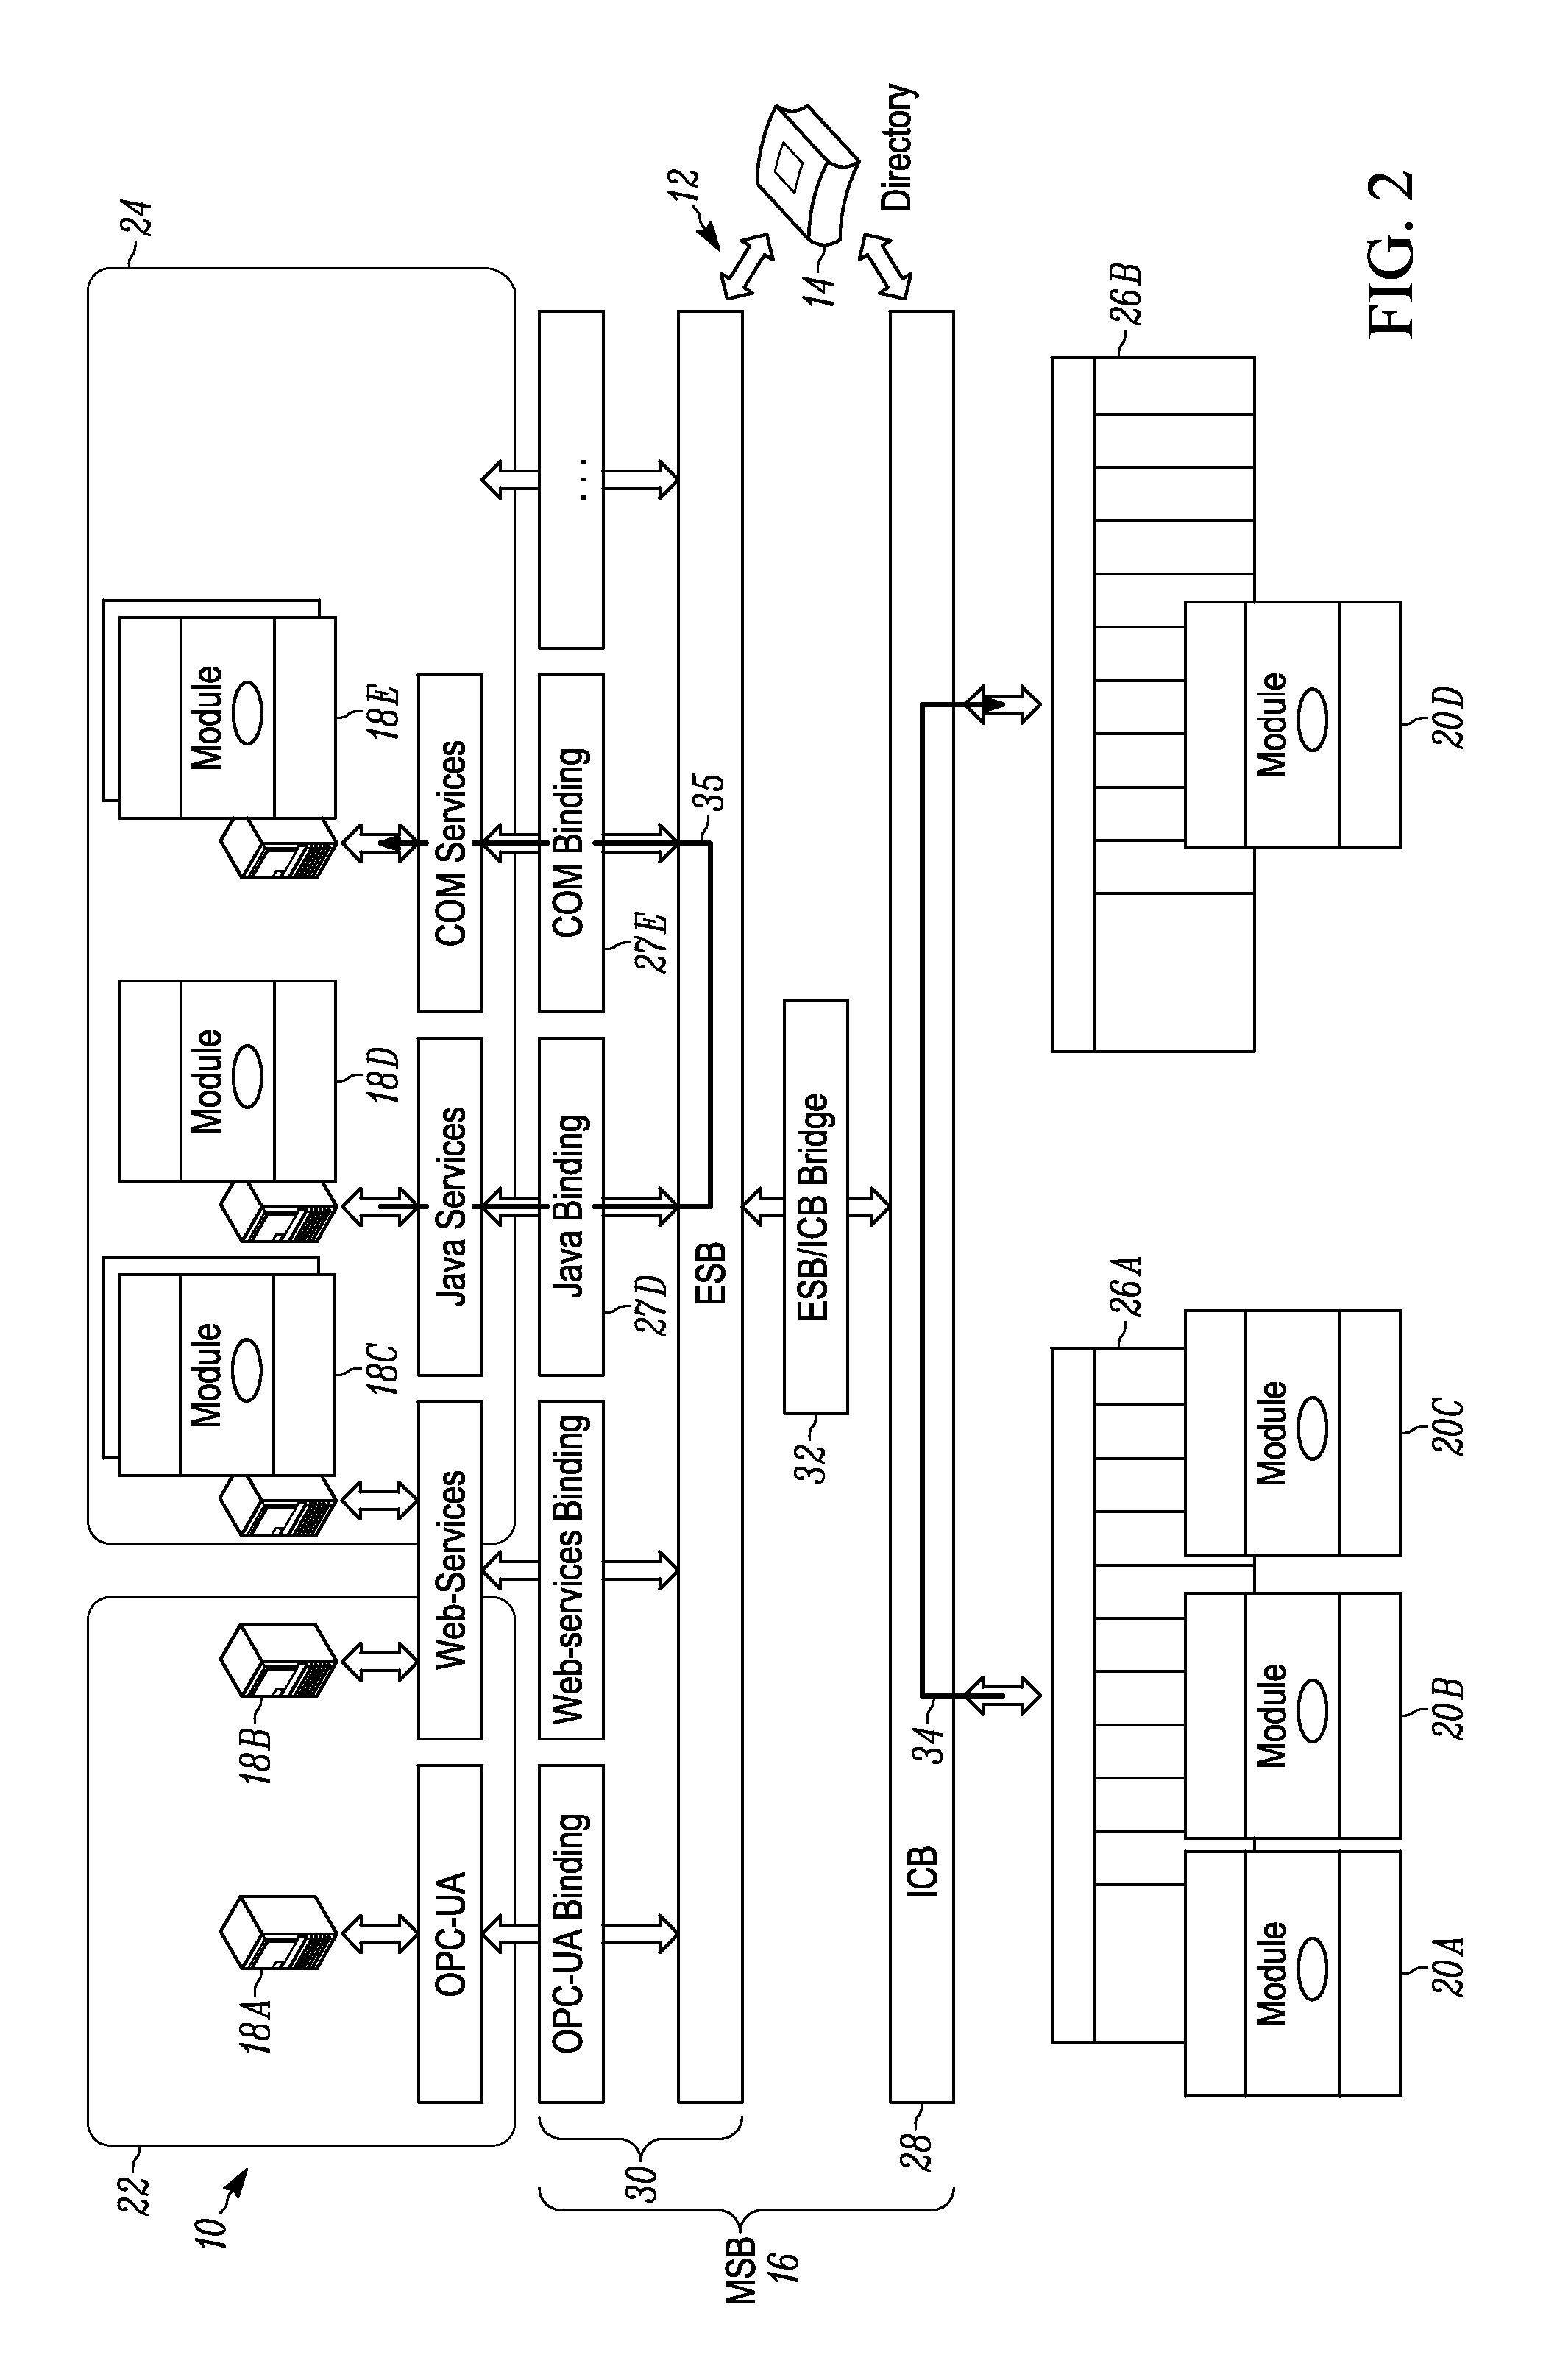 Systems and methods for conducting communications among components of multidomain industrial automation system